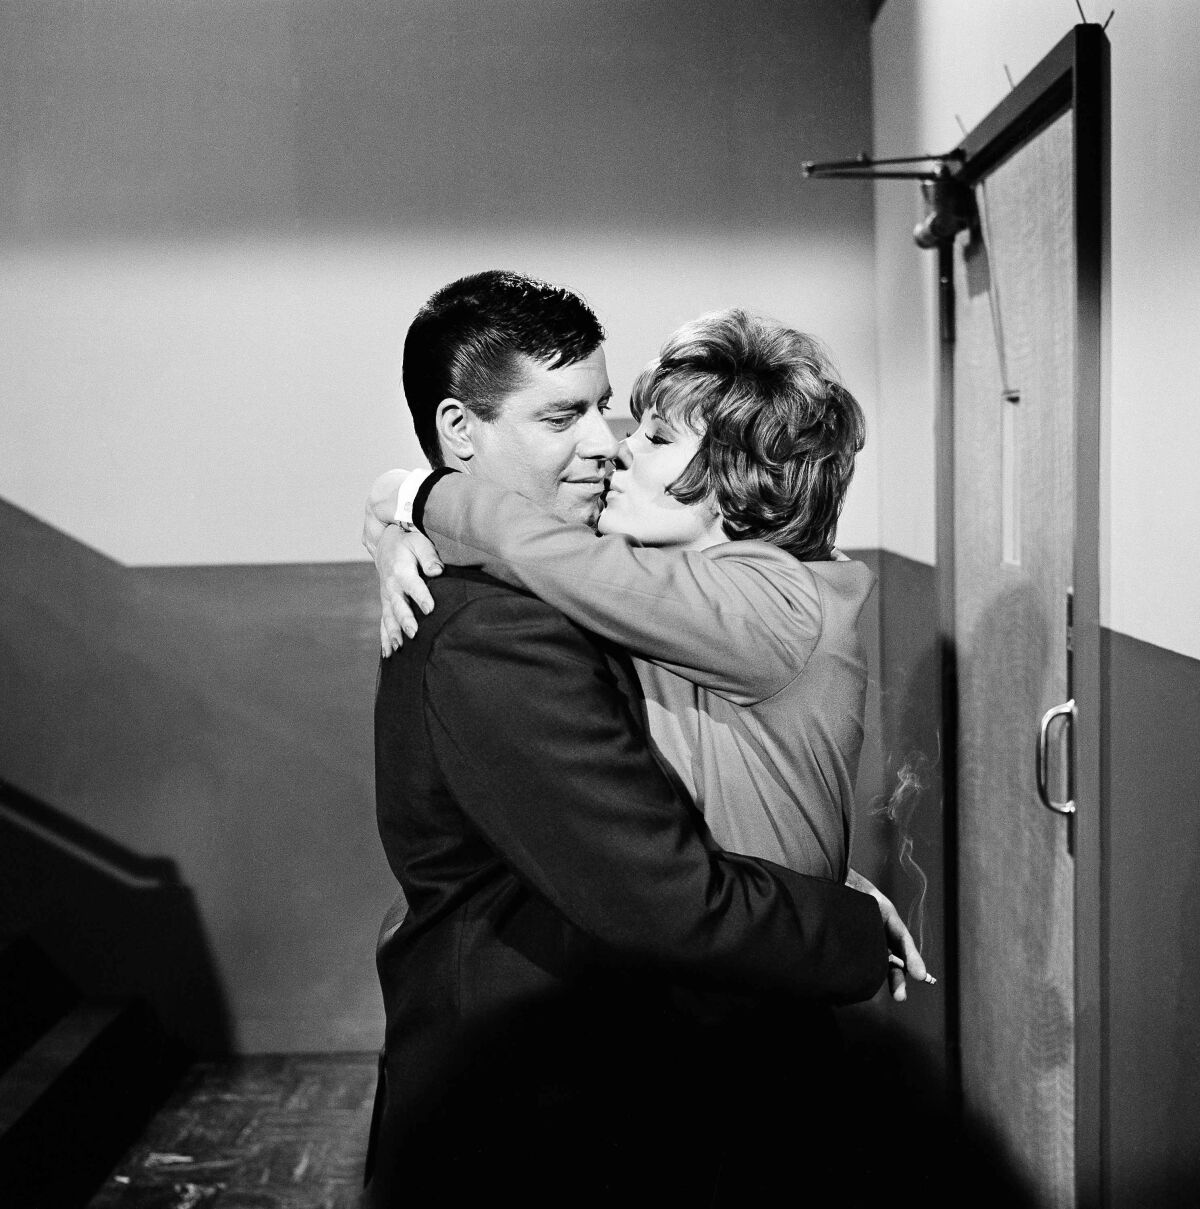 Jerry Lewis embraces and kisses Jill St. John in the 1963 movie 'Who's Minding the Store'